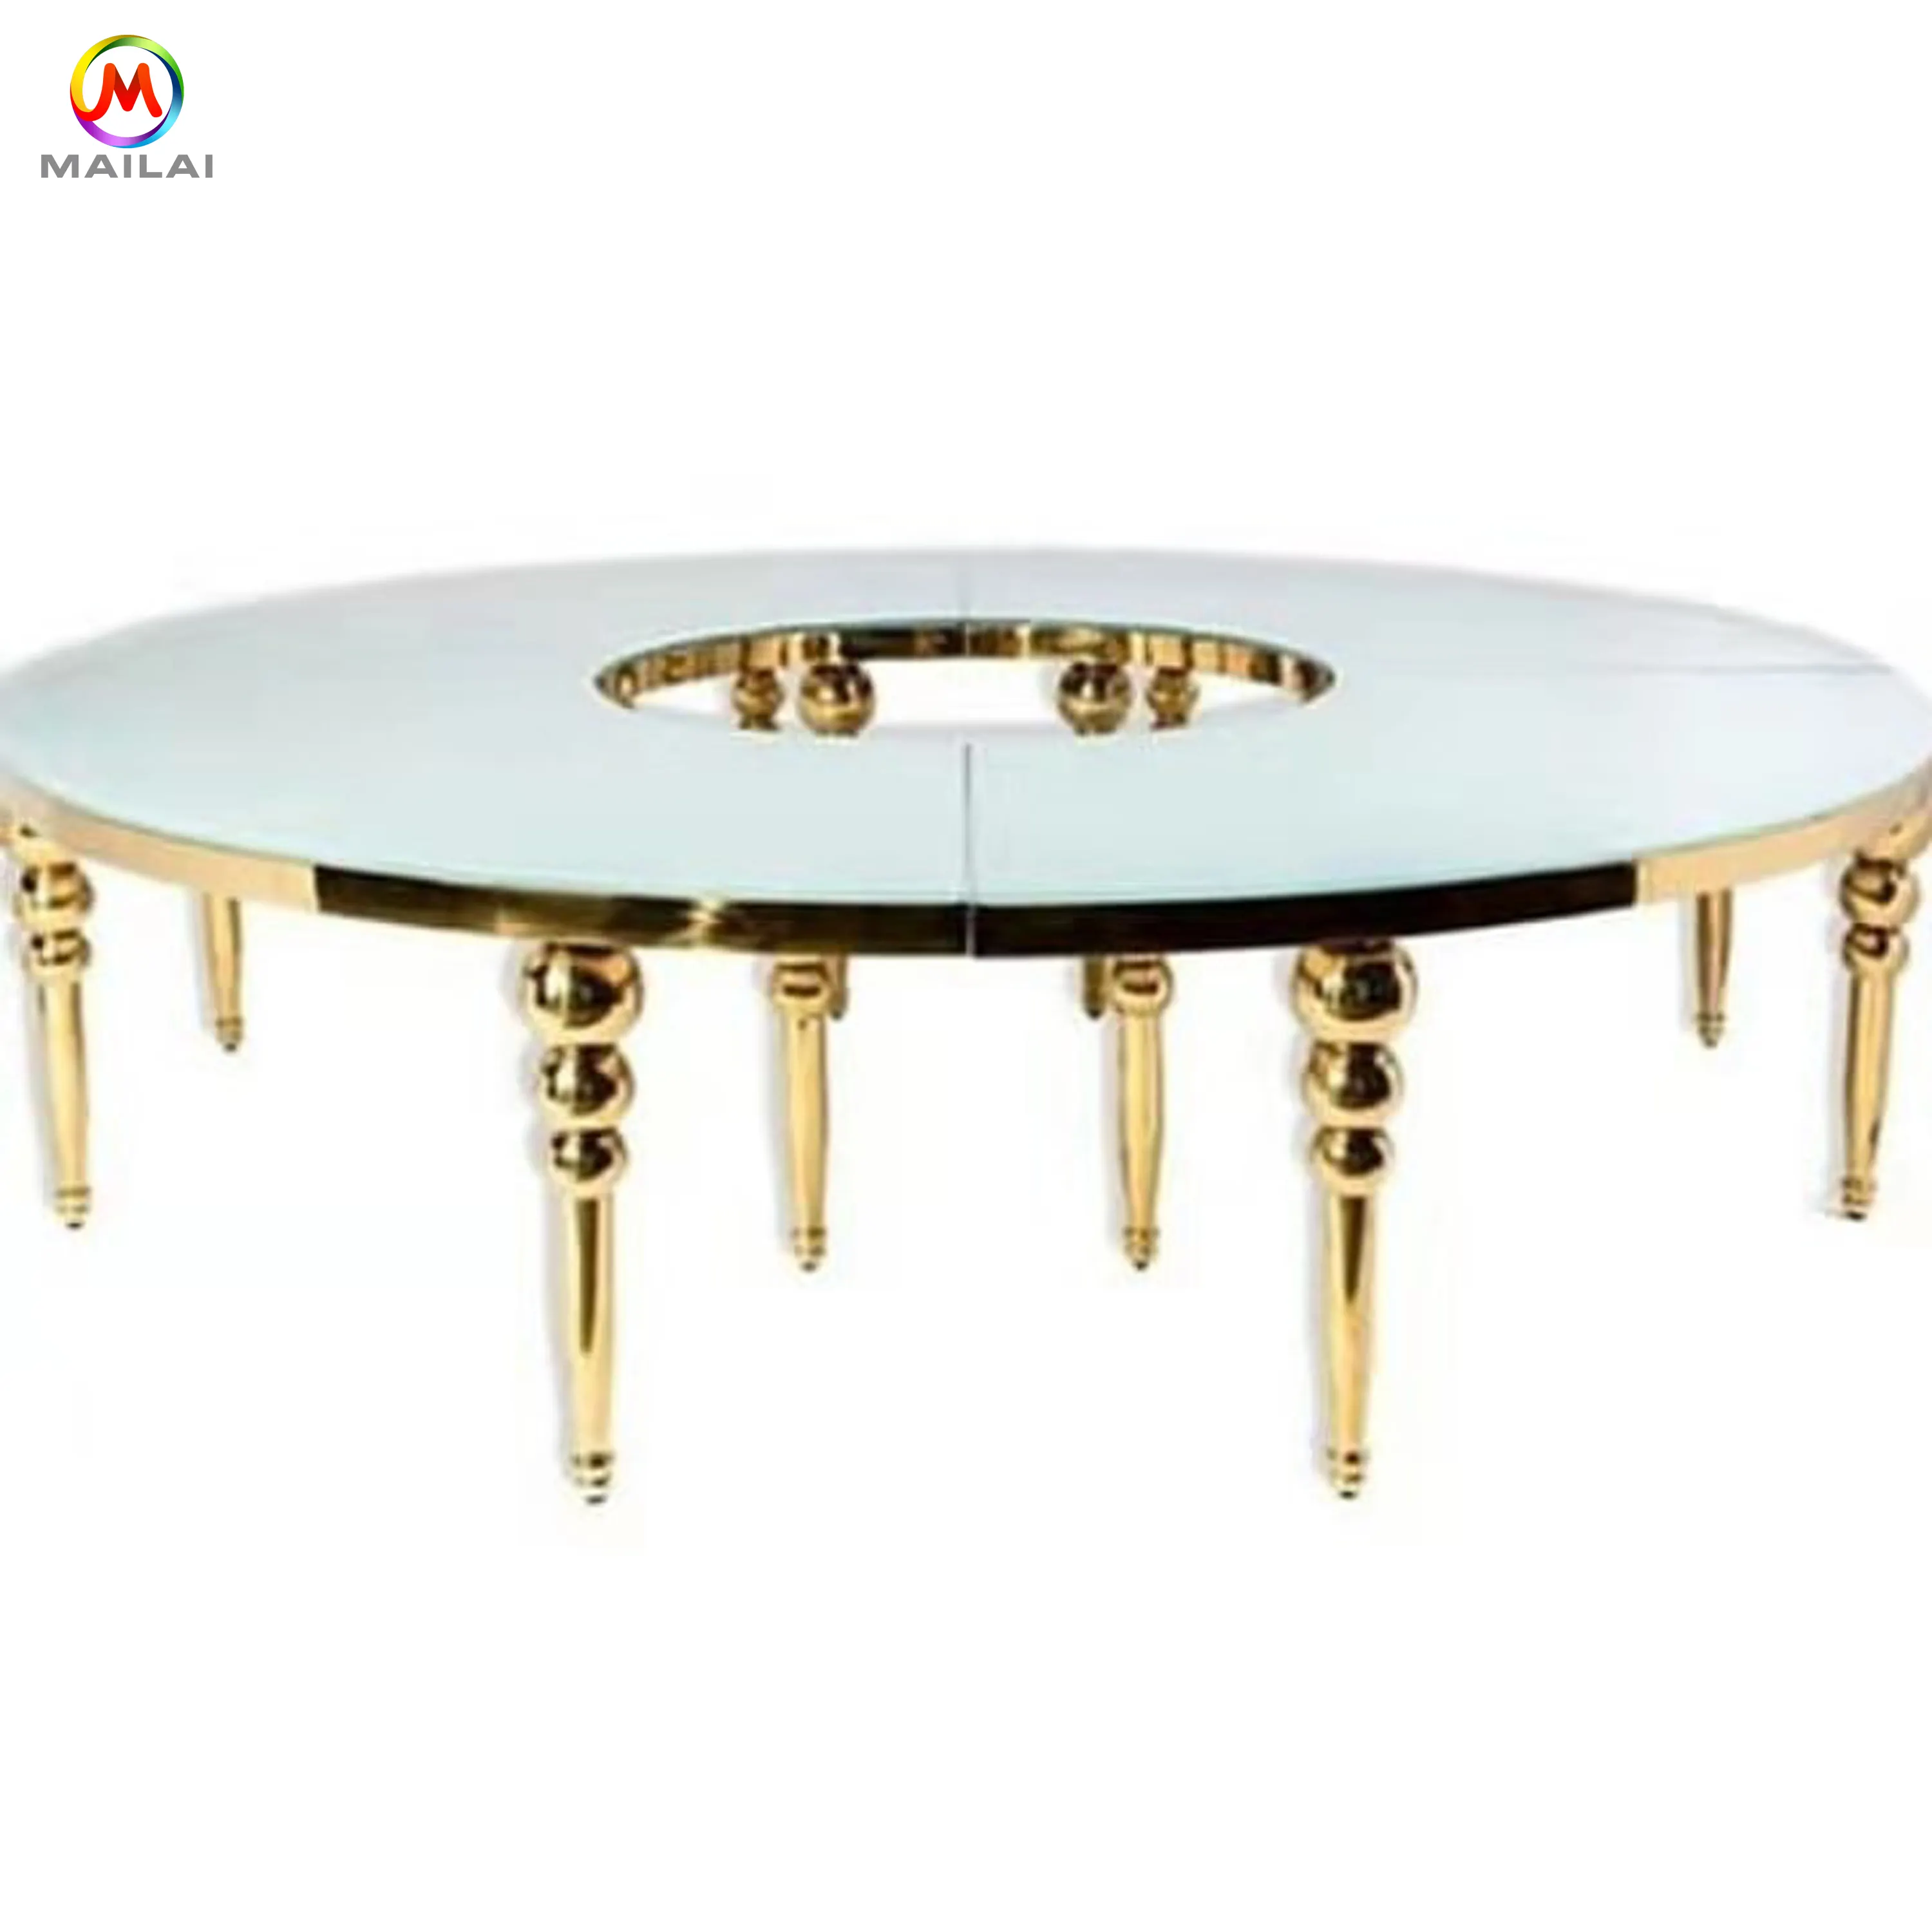 Luxury wedding dining table glass top golden stainless steel dining table for wedding